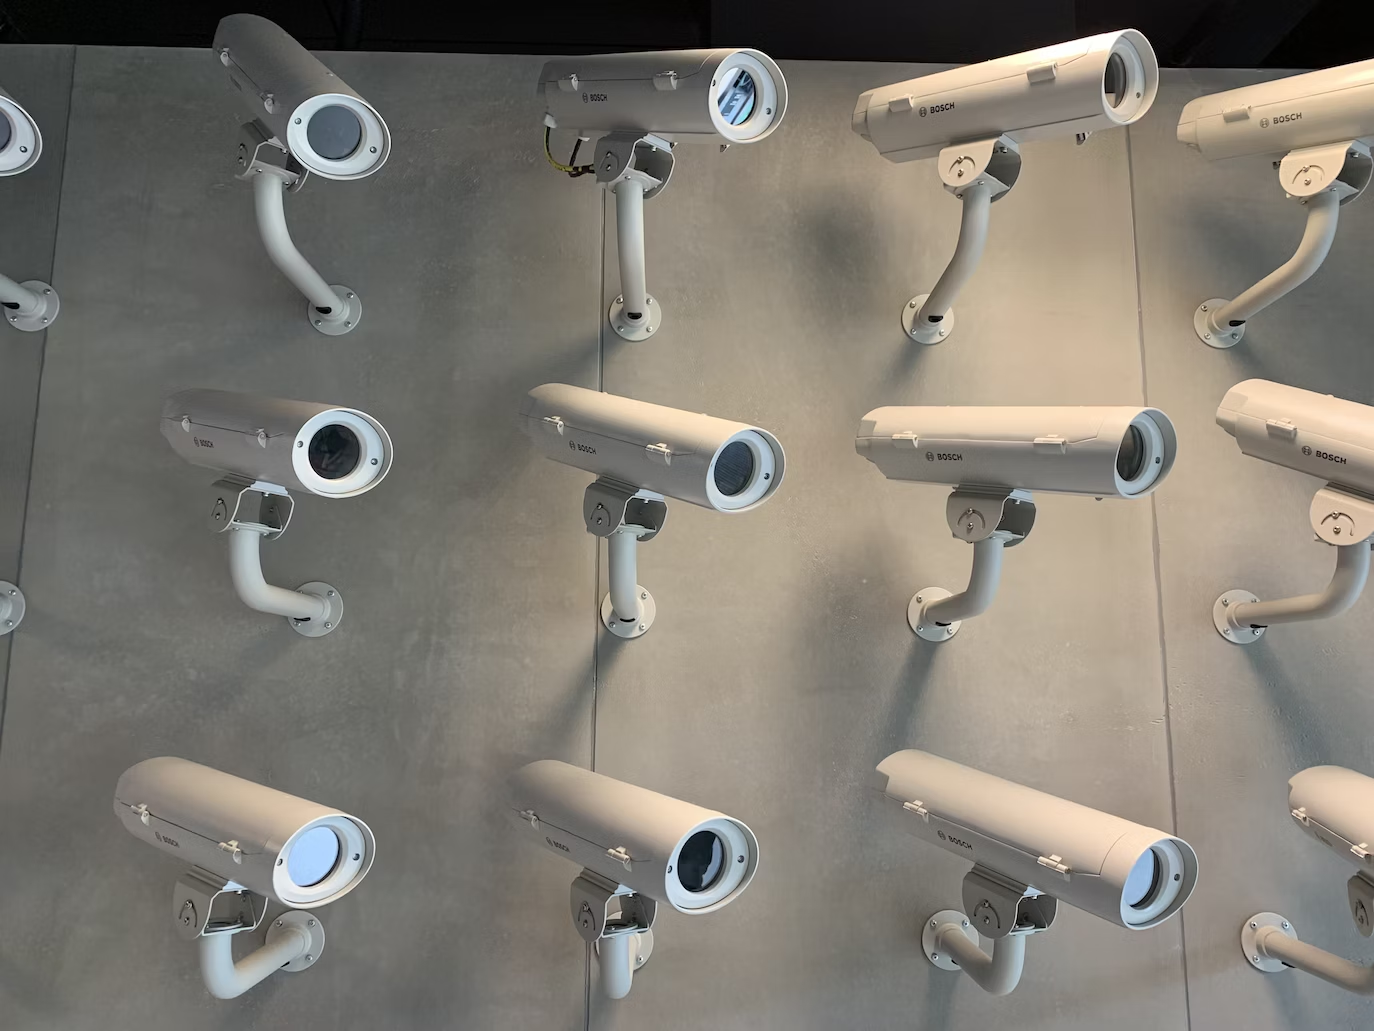 A bunch of security cameras on a wall